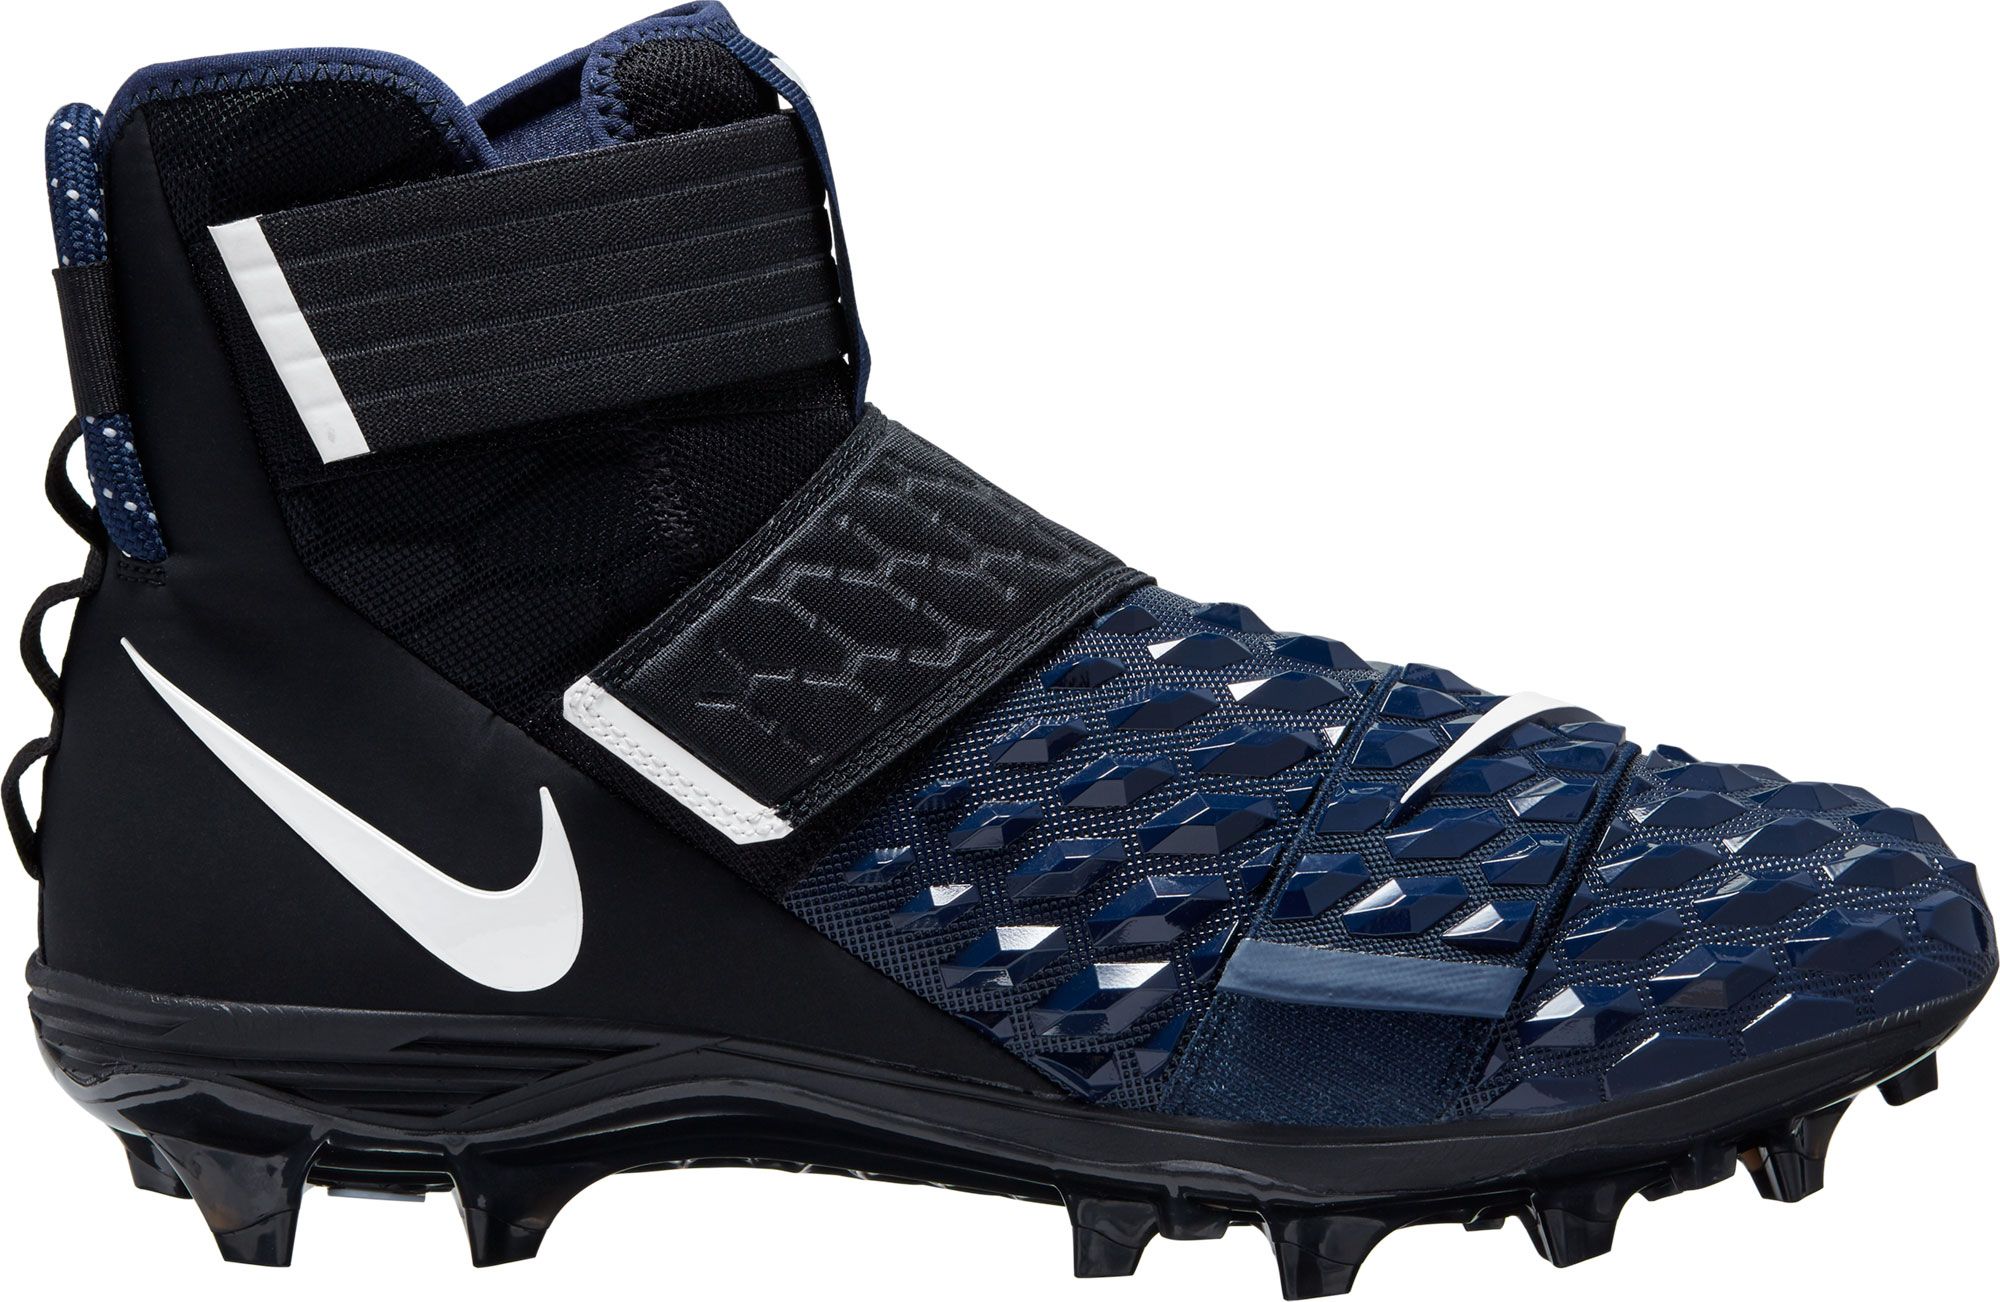 force savage cleats